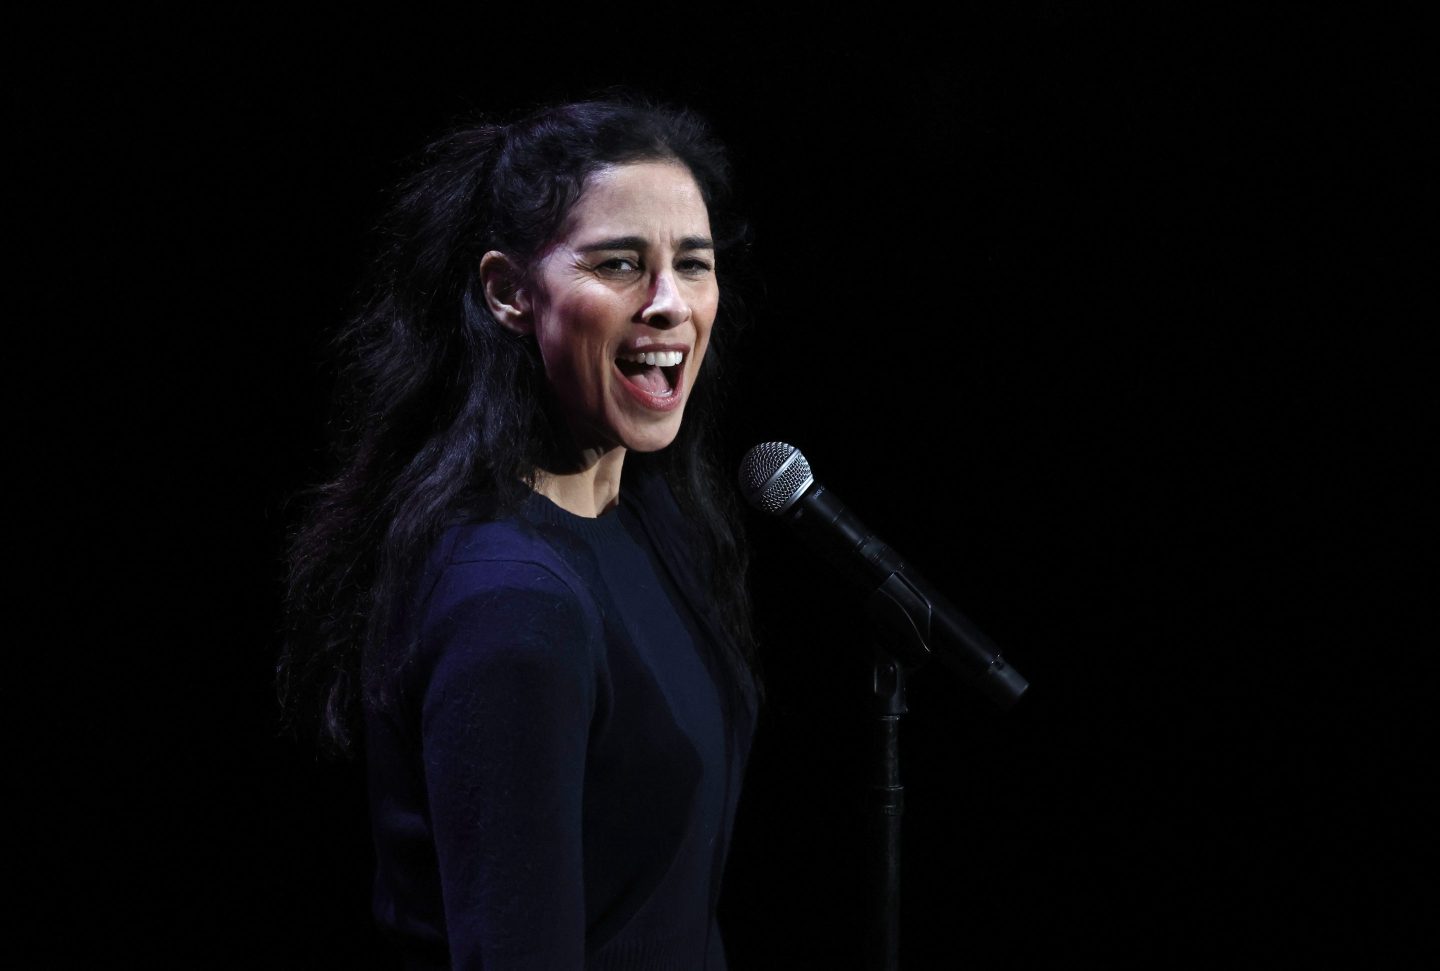 Comedian Sarah Silverman performs at the Ryman Auditorium on March 22, 2023 in Nashville, Tennessee.